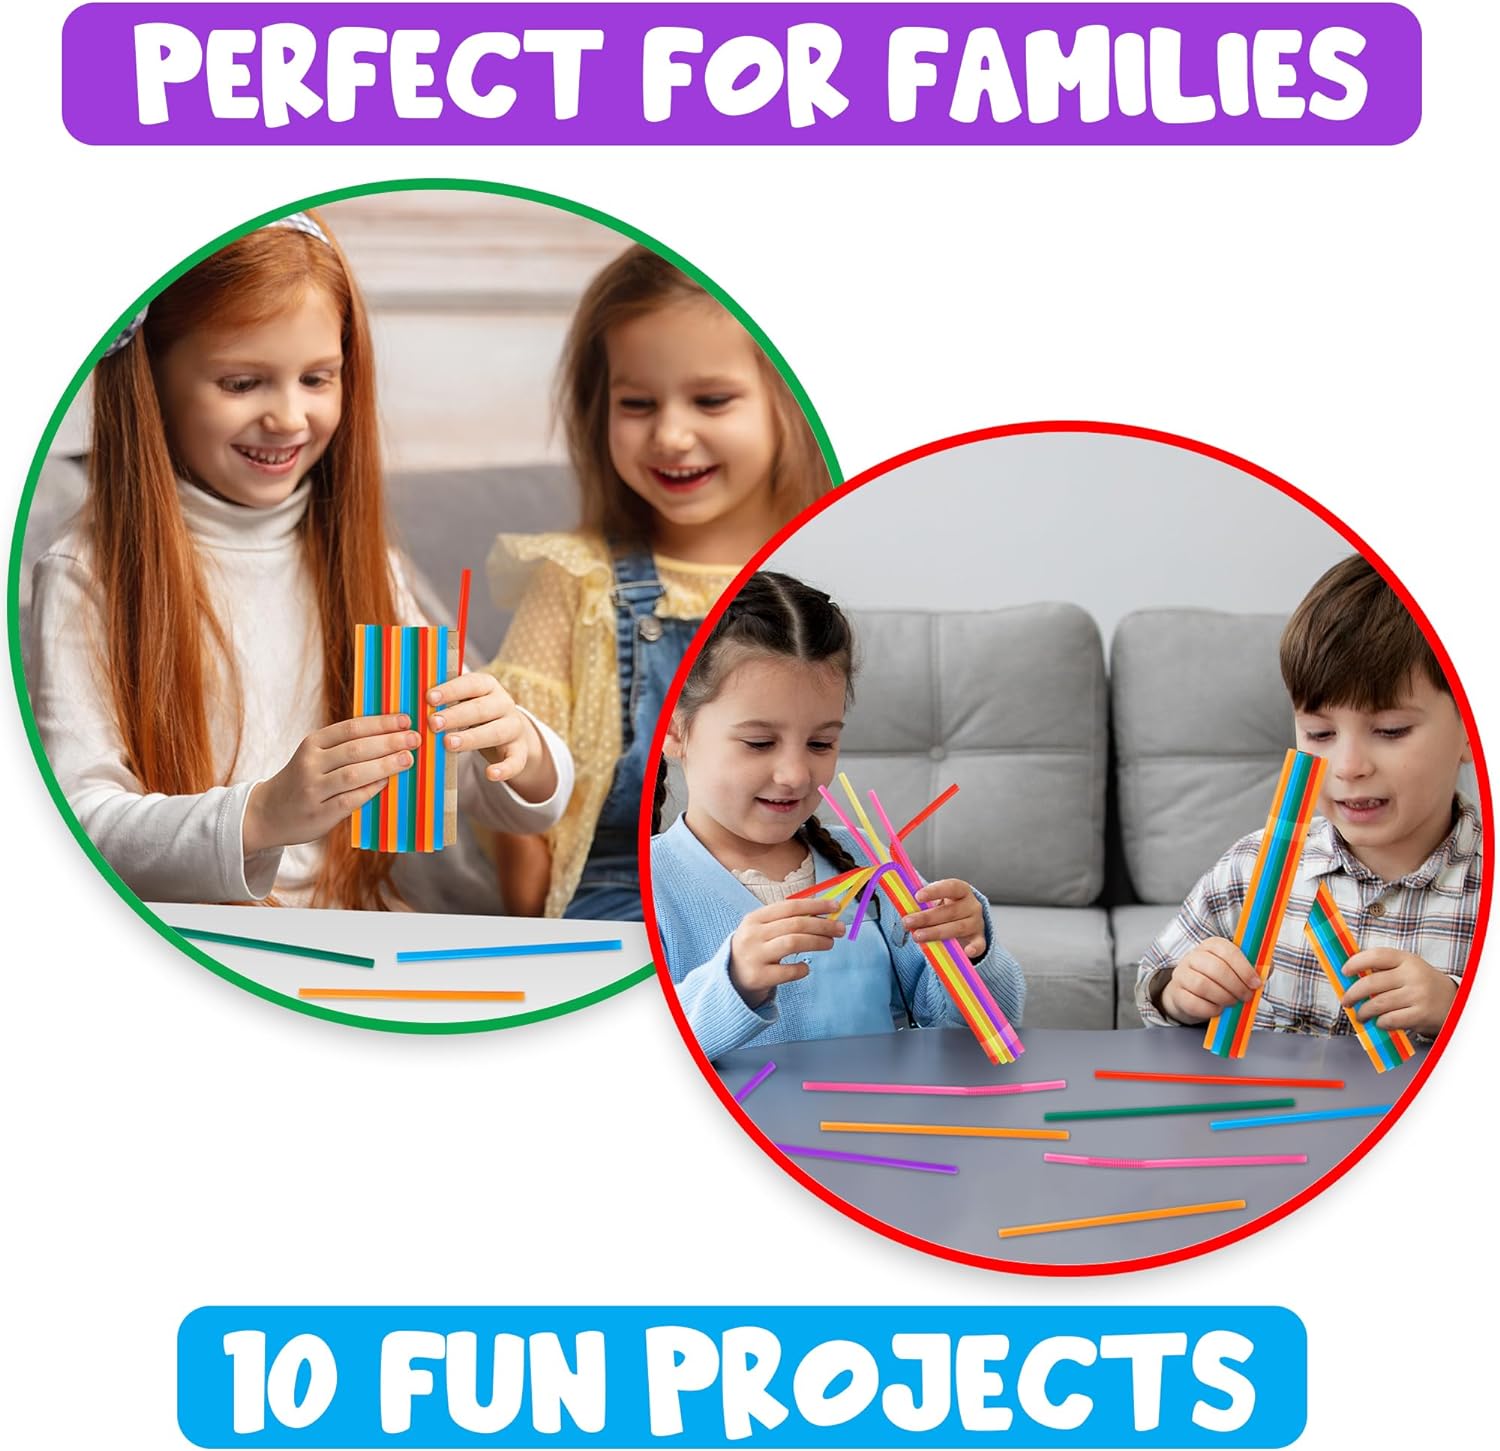 DIY Bubble Wand Craft for Kids - Set of 300 Straws, Bubble Solution and How-to Guide - Ages 4-10